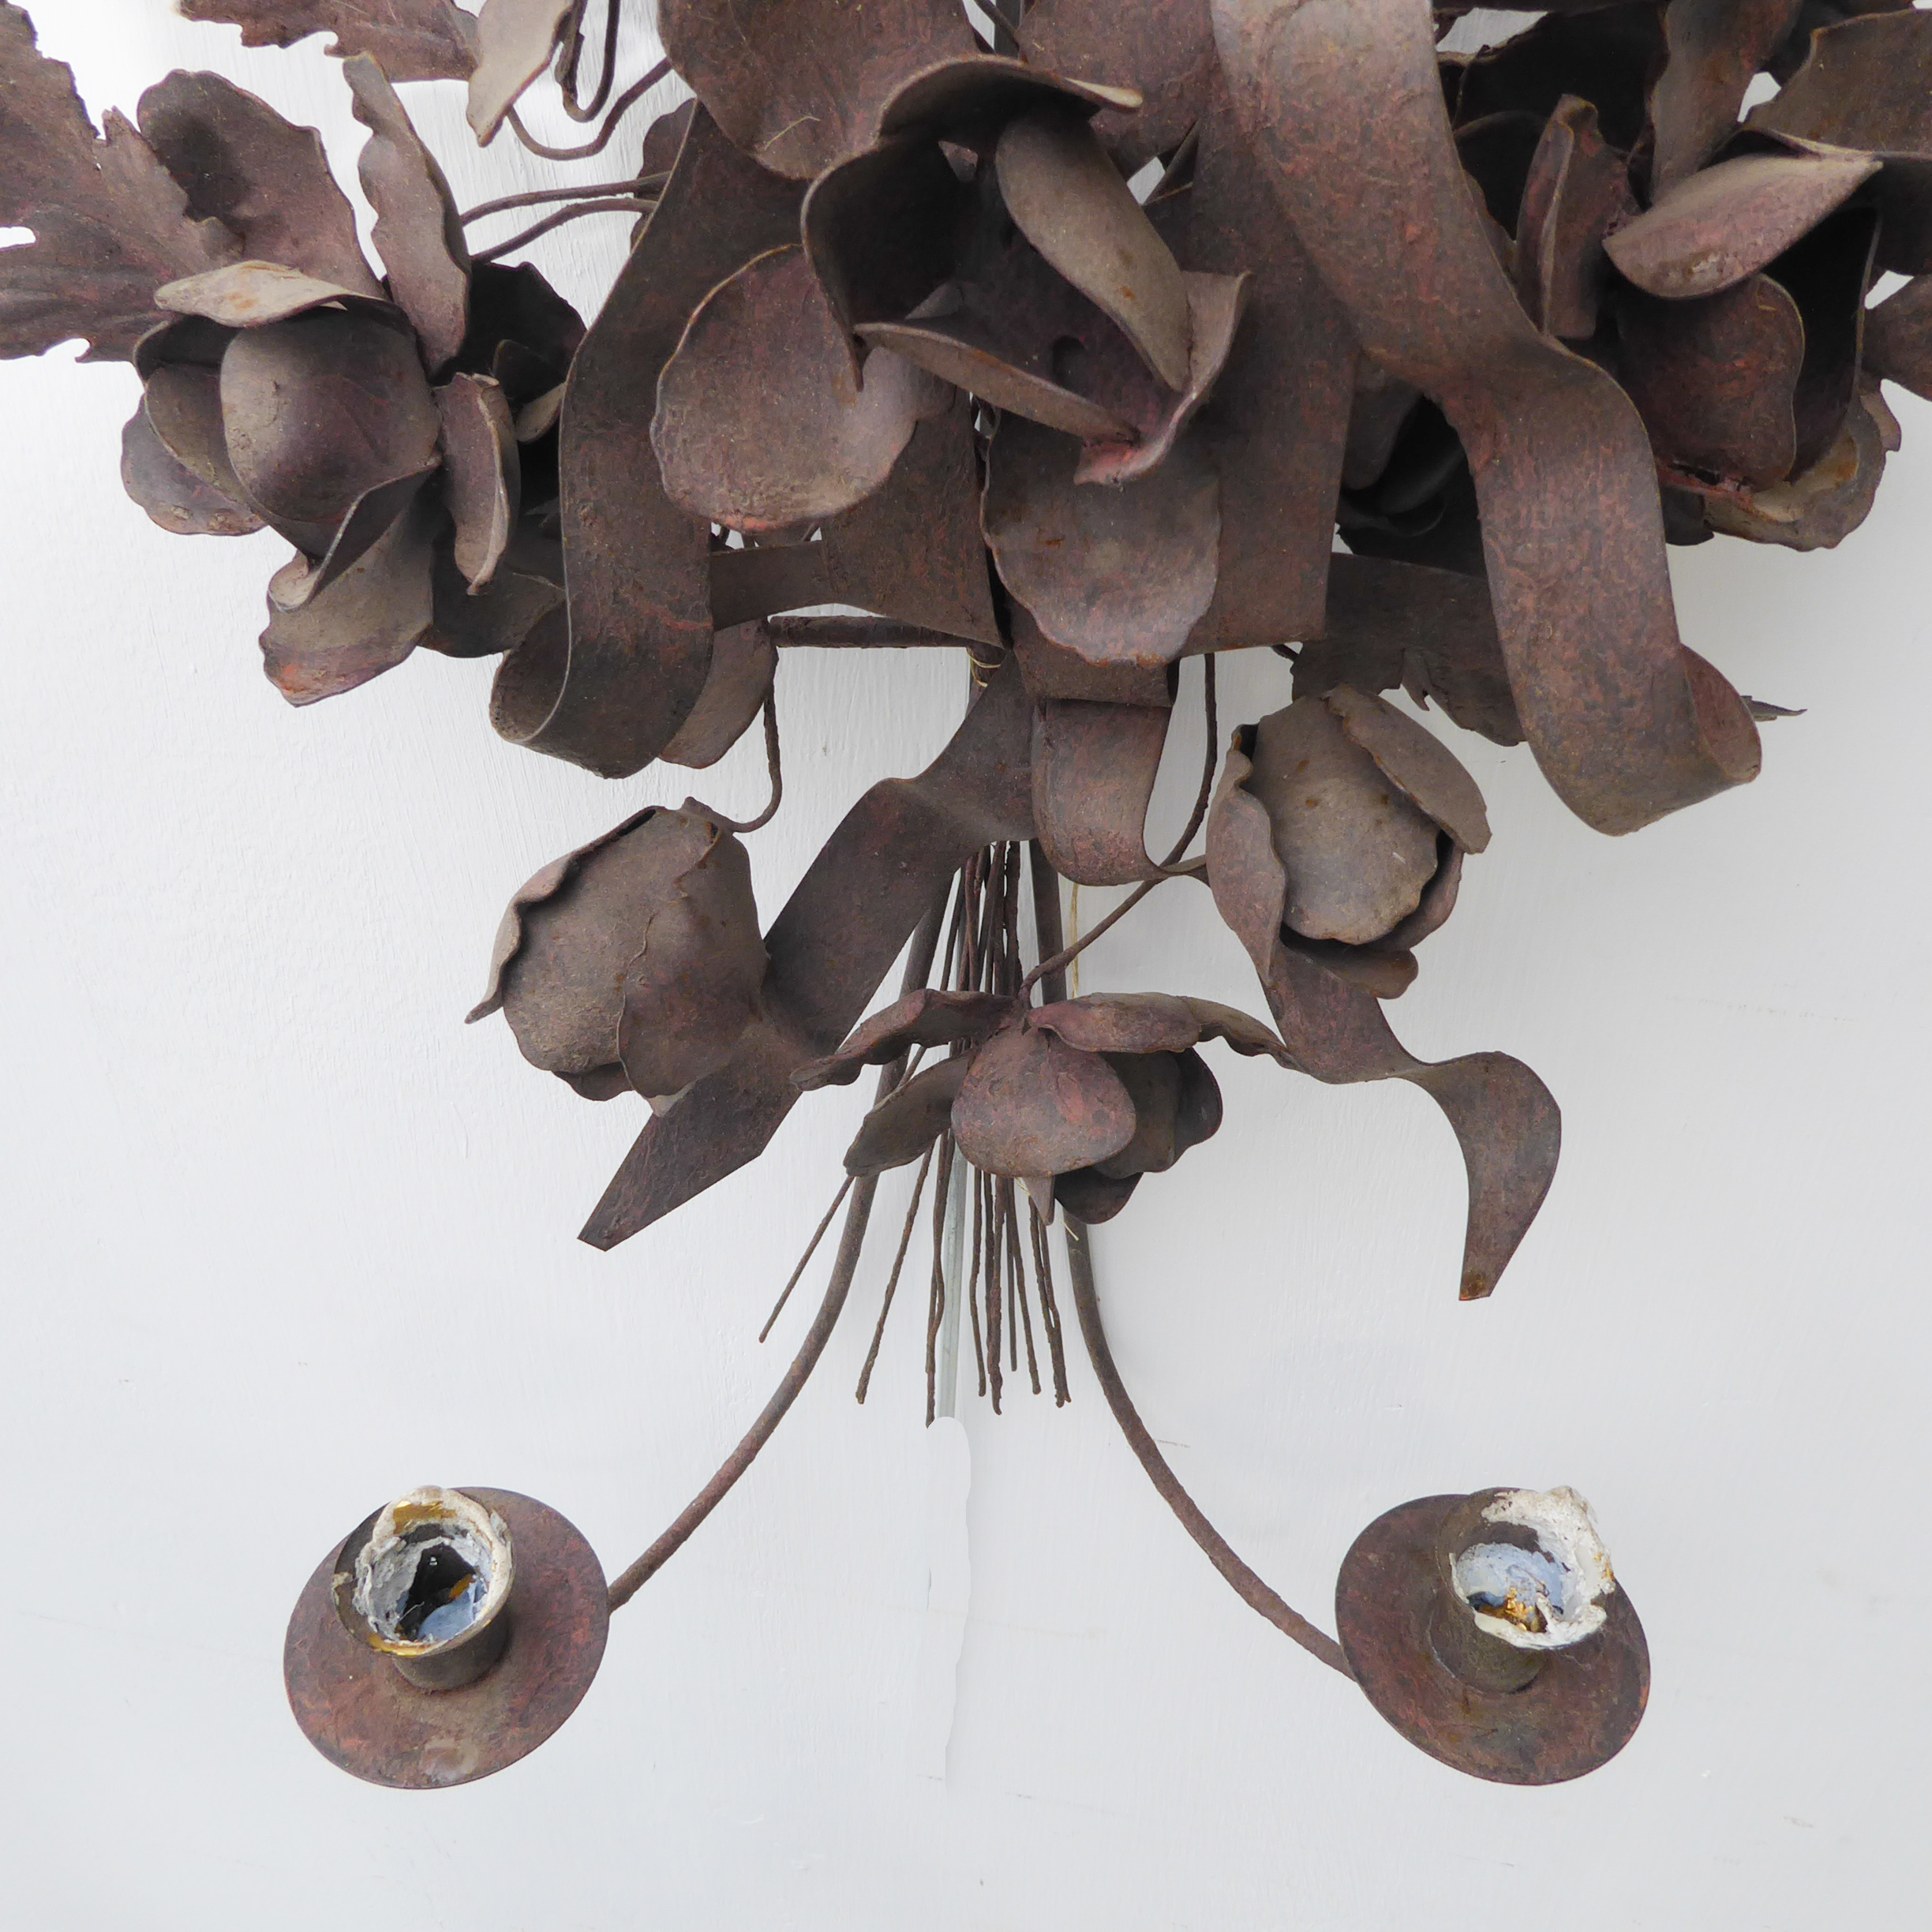 A pair of two-light wall sconces with handmade metal flowers above the candle holders (46 cm high) - Image 3 of 3